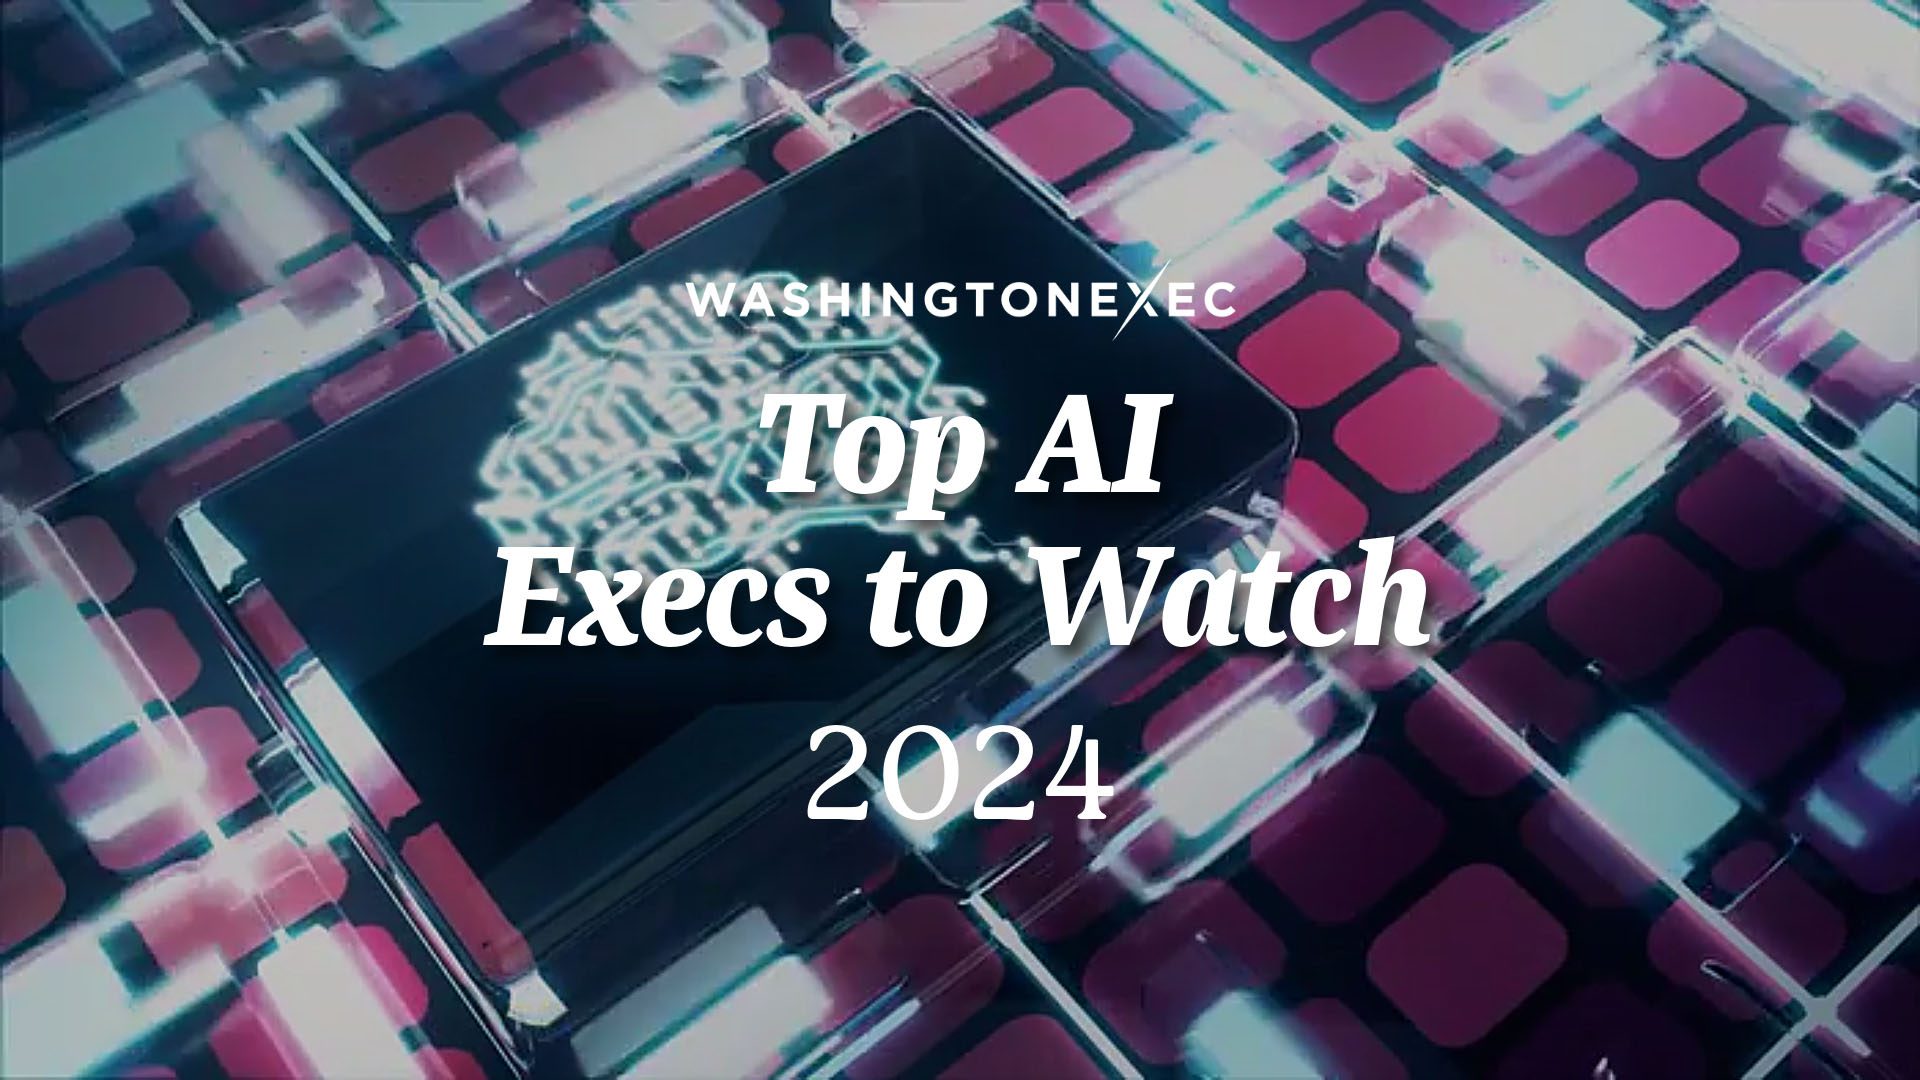 Top AI Execs to Watch in 2024